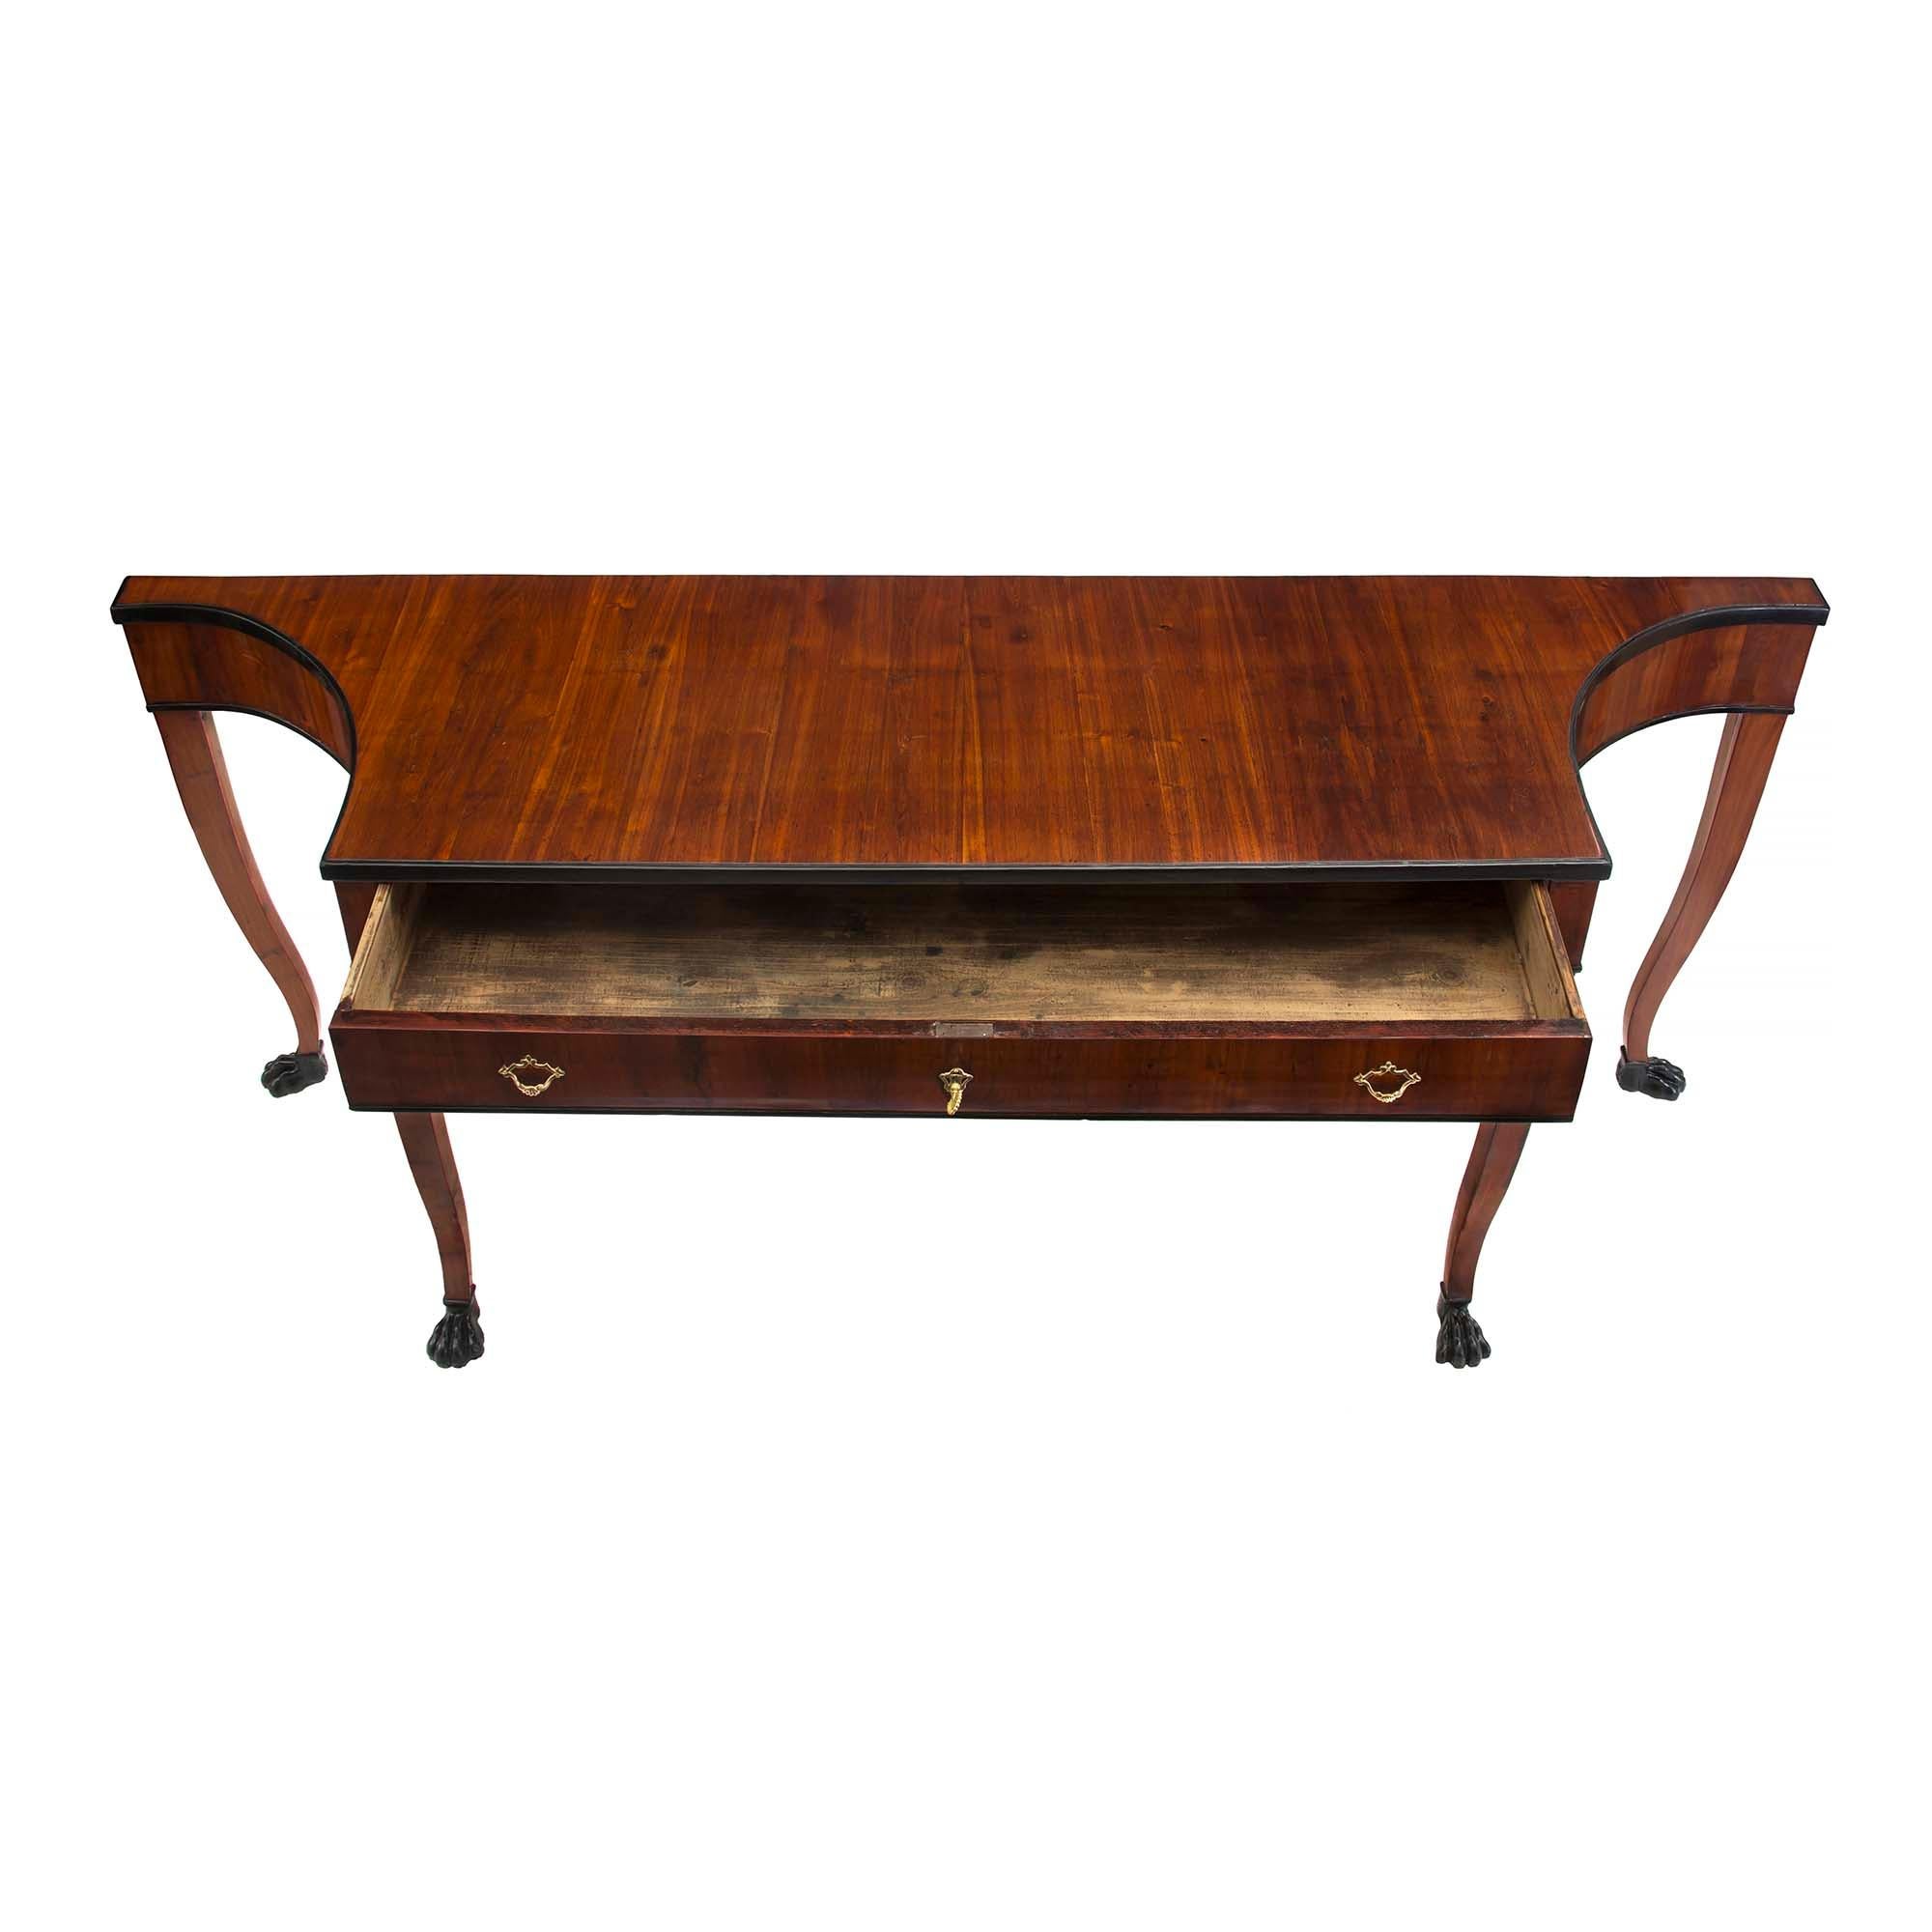 Ebonized Italian Early 19th Century Neoclassical Style Mahogany and Fruitwood Console For Sale